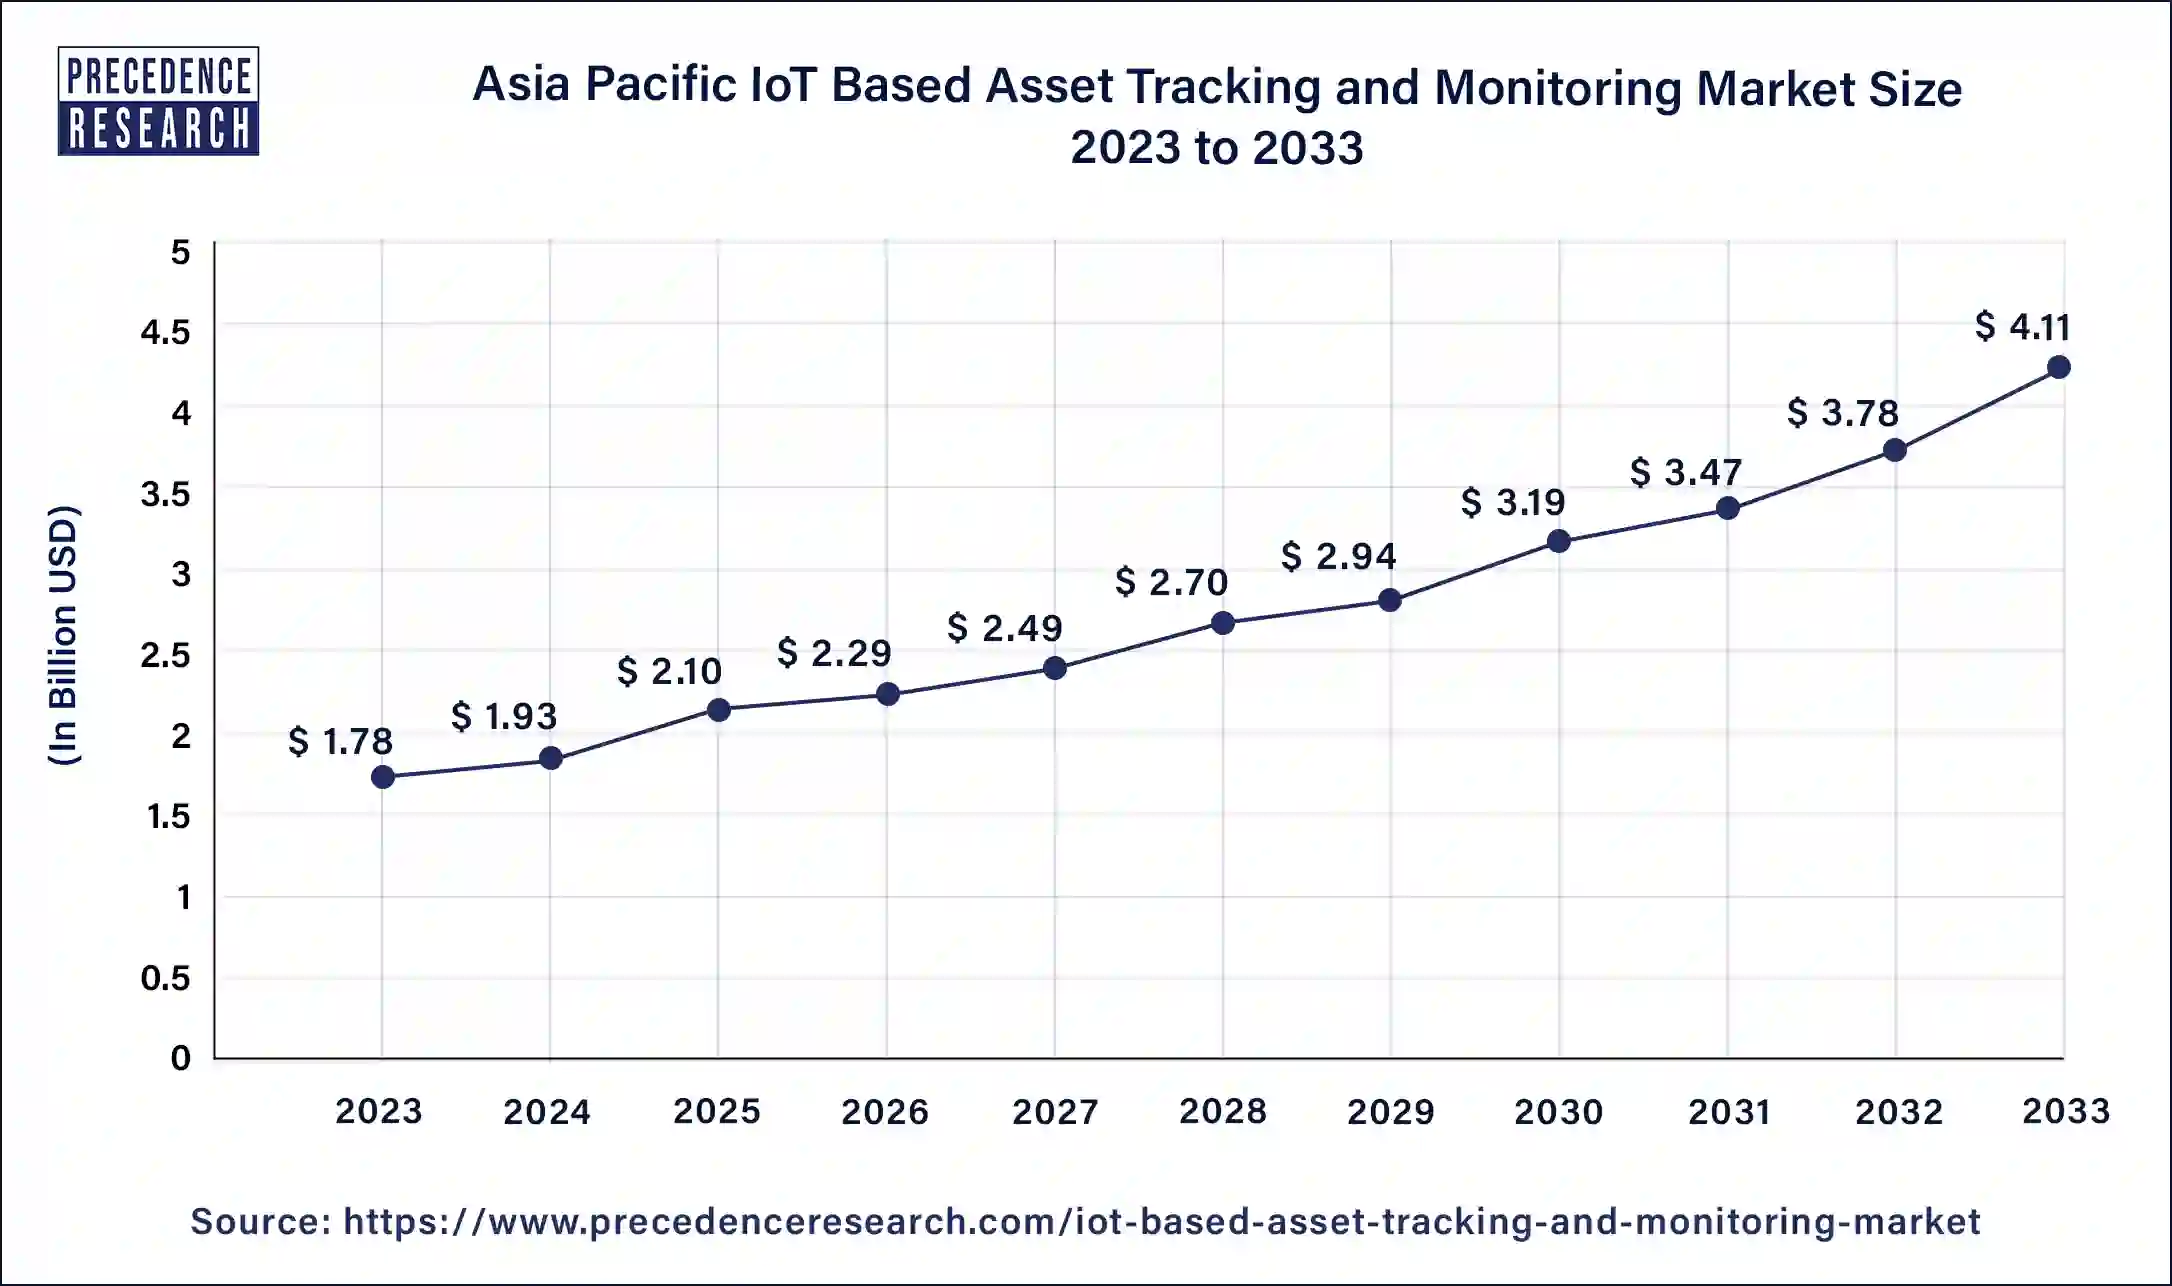 Asia Pacific IoT Based Asset Tracking and Monitoring Market Size 2024 to 2033